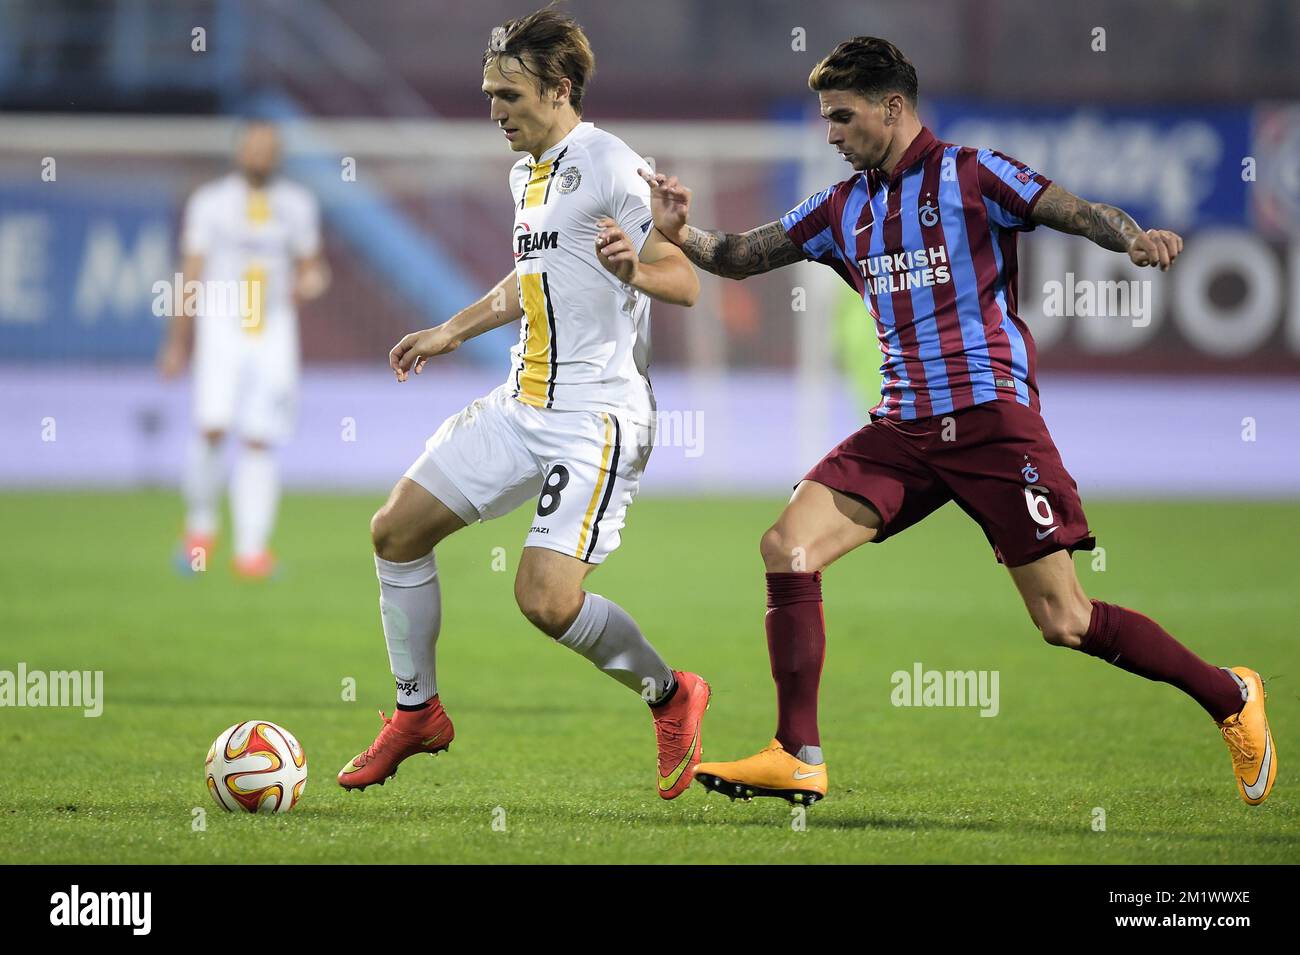 20141023 - TRABZON, TURKEY: Lokeren's Besart Abdurahimi and Trabzonspor's Carl Medjani fight for the ball during a game between Turkish club Trabzonspor AS and Belgian soccer team KSC Lokeren OVL in the Huseyin Avni Aker Stadium in Trabzon, Thursday 23 October 2014. It is the third day of the group stage of the UEFA Europa League competition, in group L. BELGA PHOTO YORICK JANSENS Stock Photo